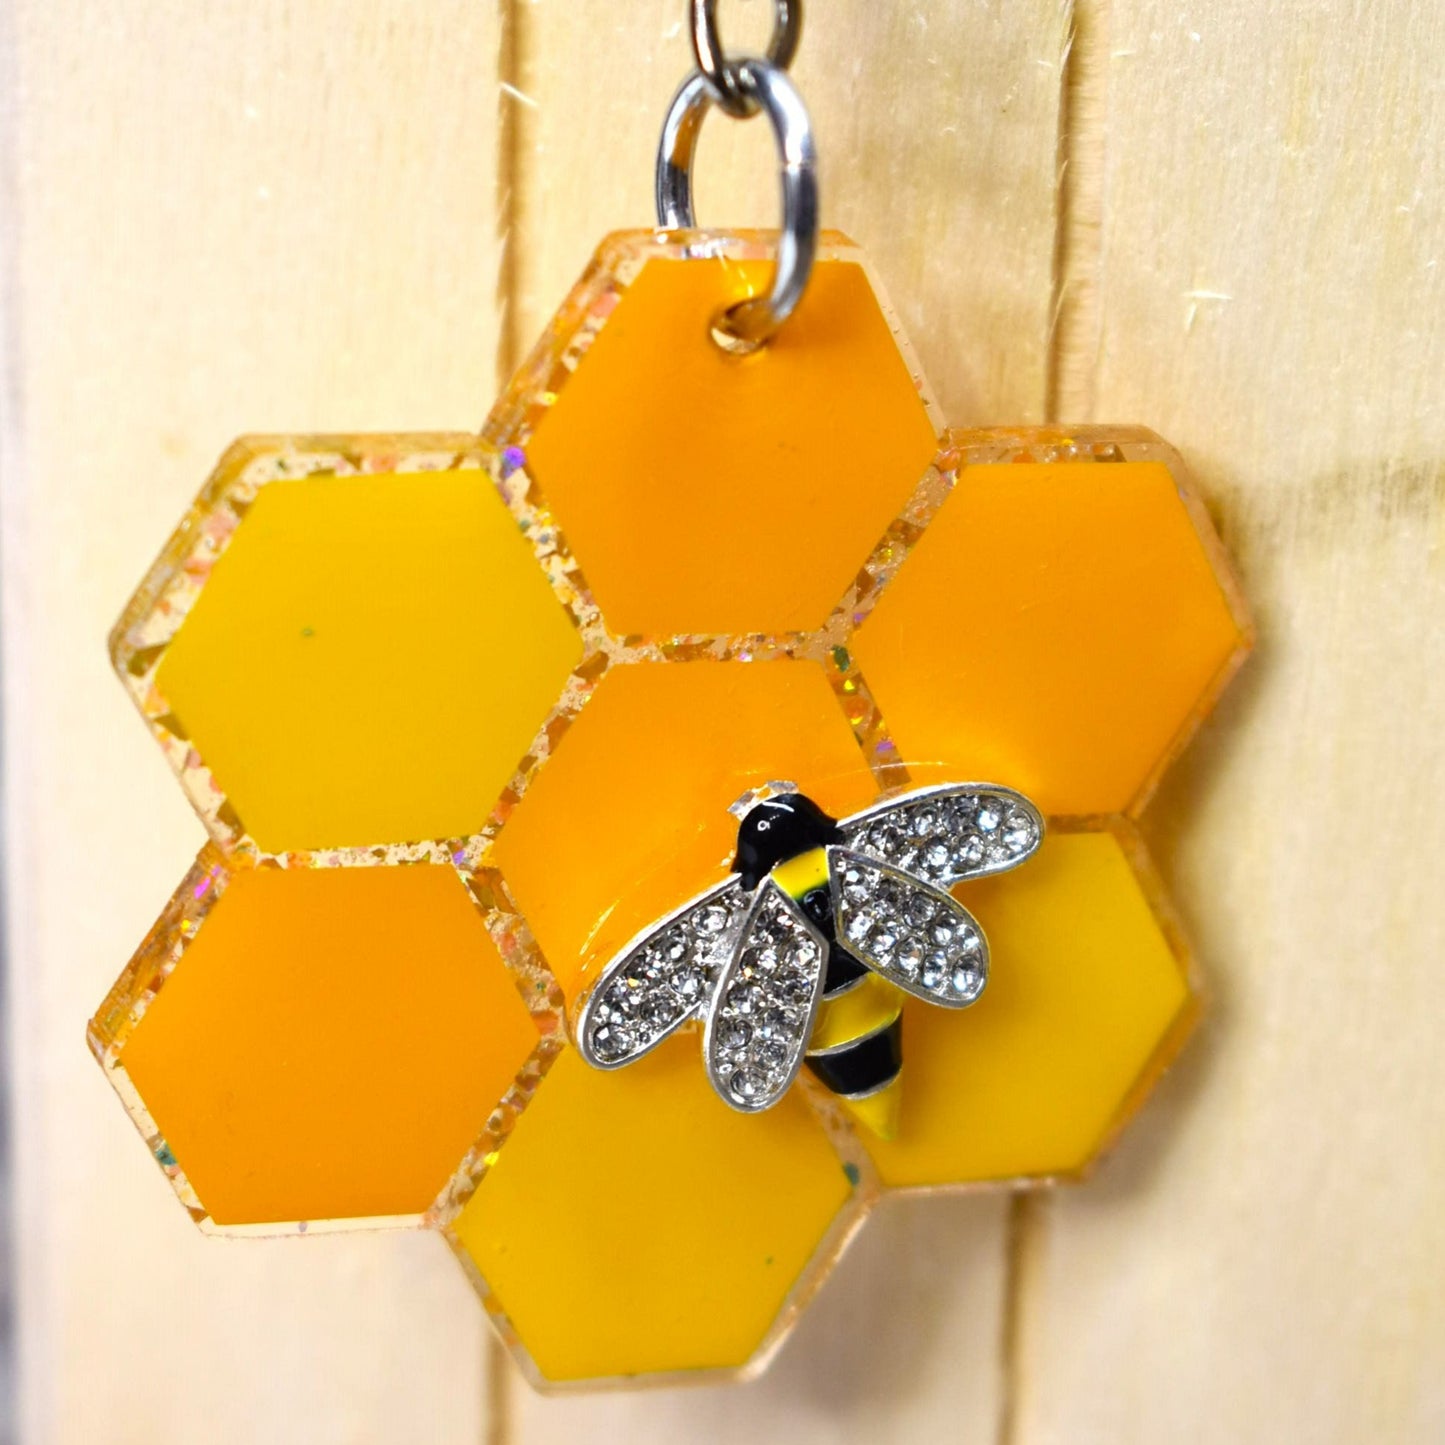 These Keychains are as busy as bees. With a Honey Comb pattern, glitter backs, and a sturdy acrylic resin material, you'll be buzzing with joy. Choose from 2 bee styles - a 2 wing or a 4 wing option.